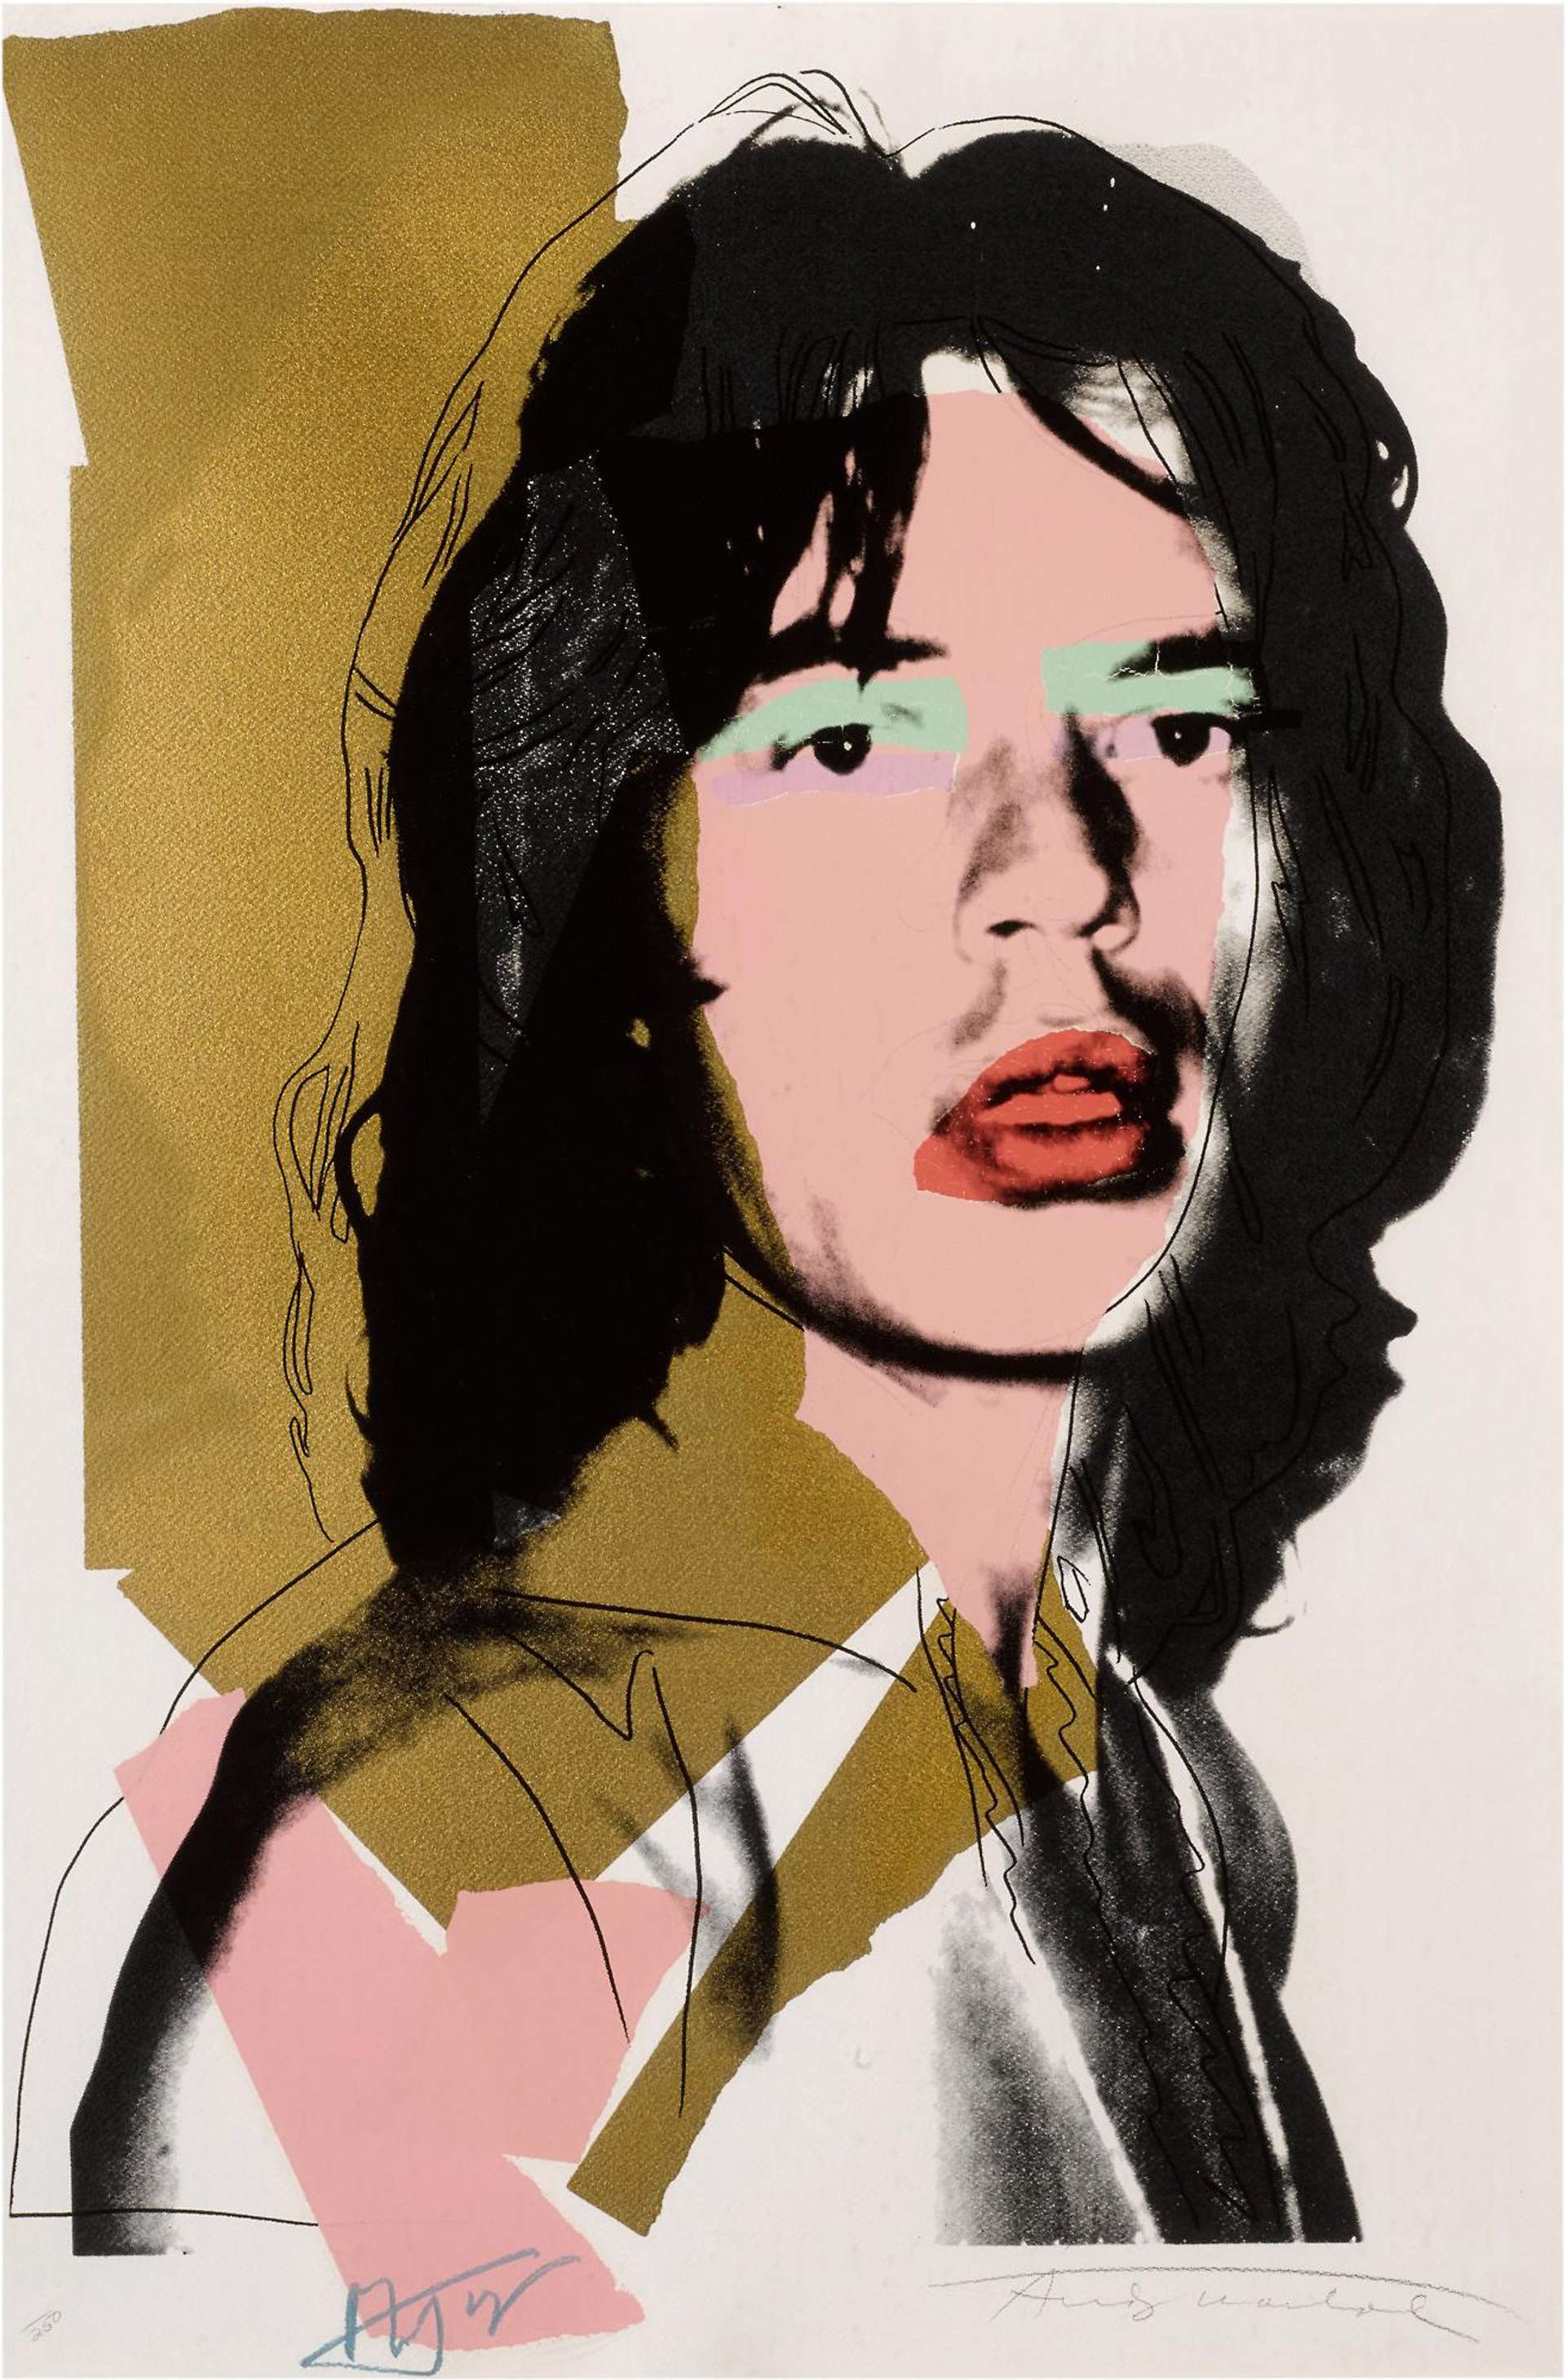 A screenprint by Andy Warhol depicting Mick Jagger in black ink, against a collaged background of gold paper, with pink, mint green, and red blocks of colour used to delineate the skin, eyes, and mouth.